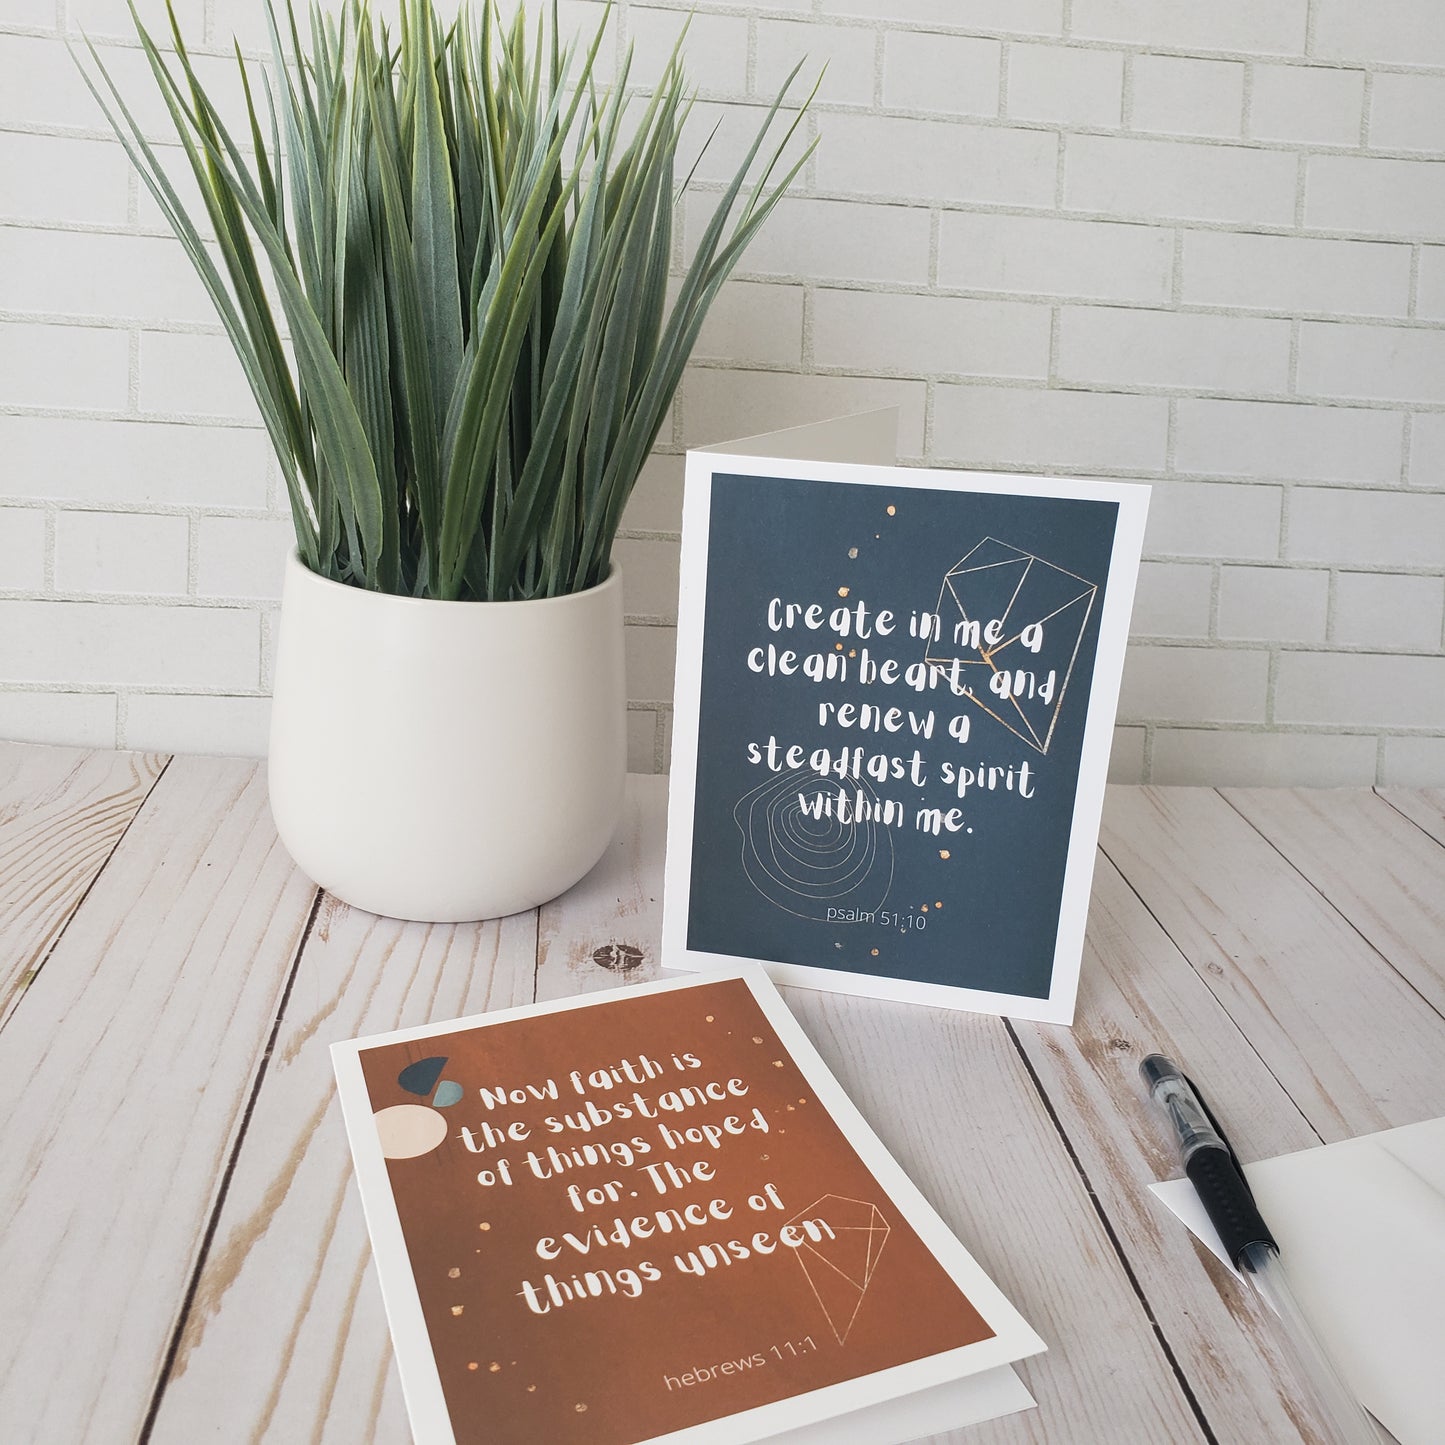 Scripture Greeting Cards In Modern Abstract Design